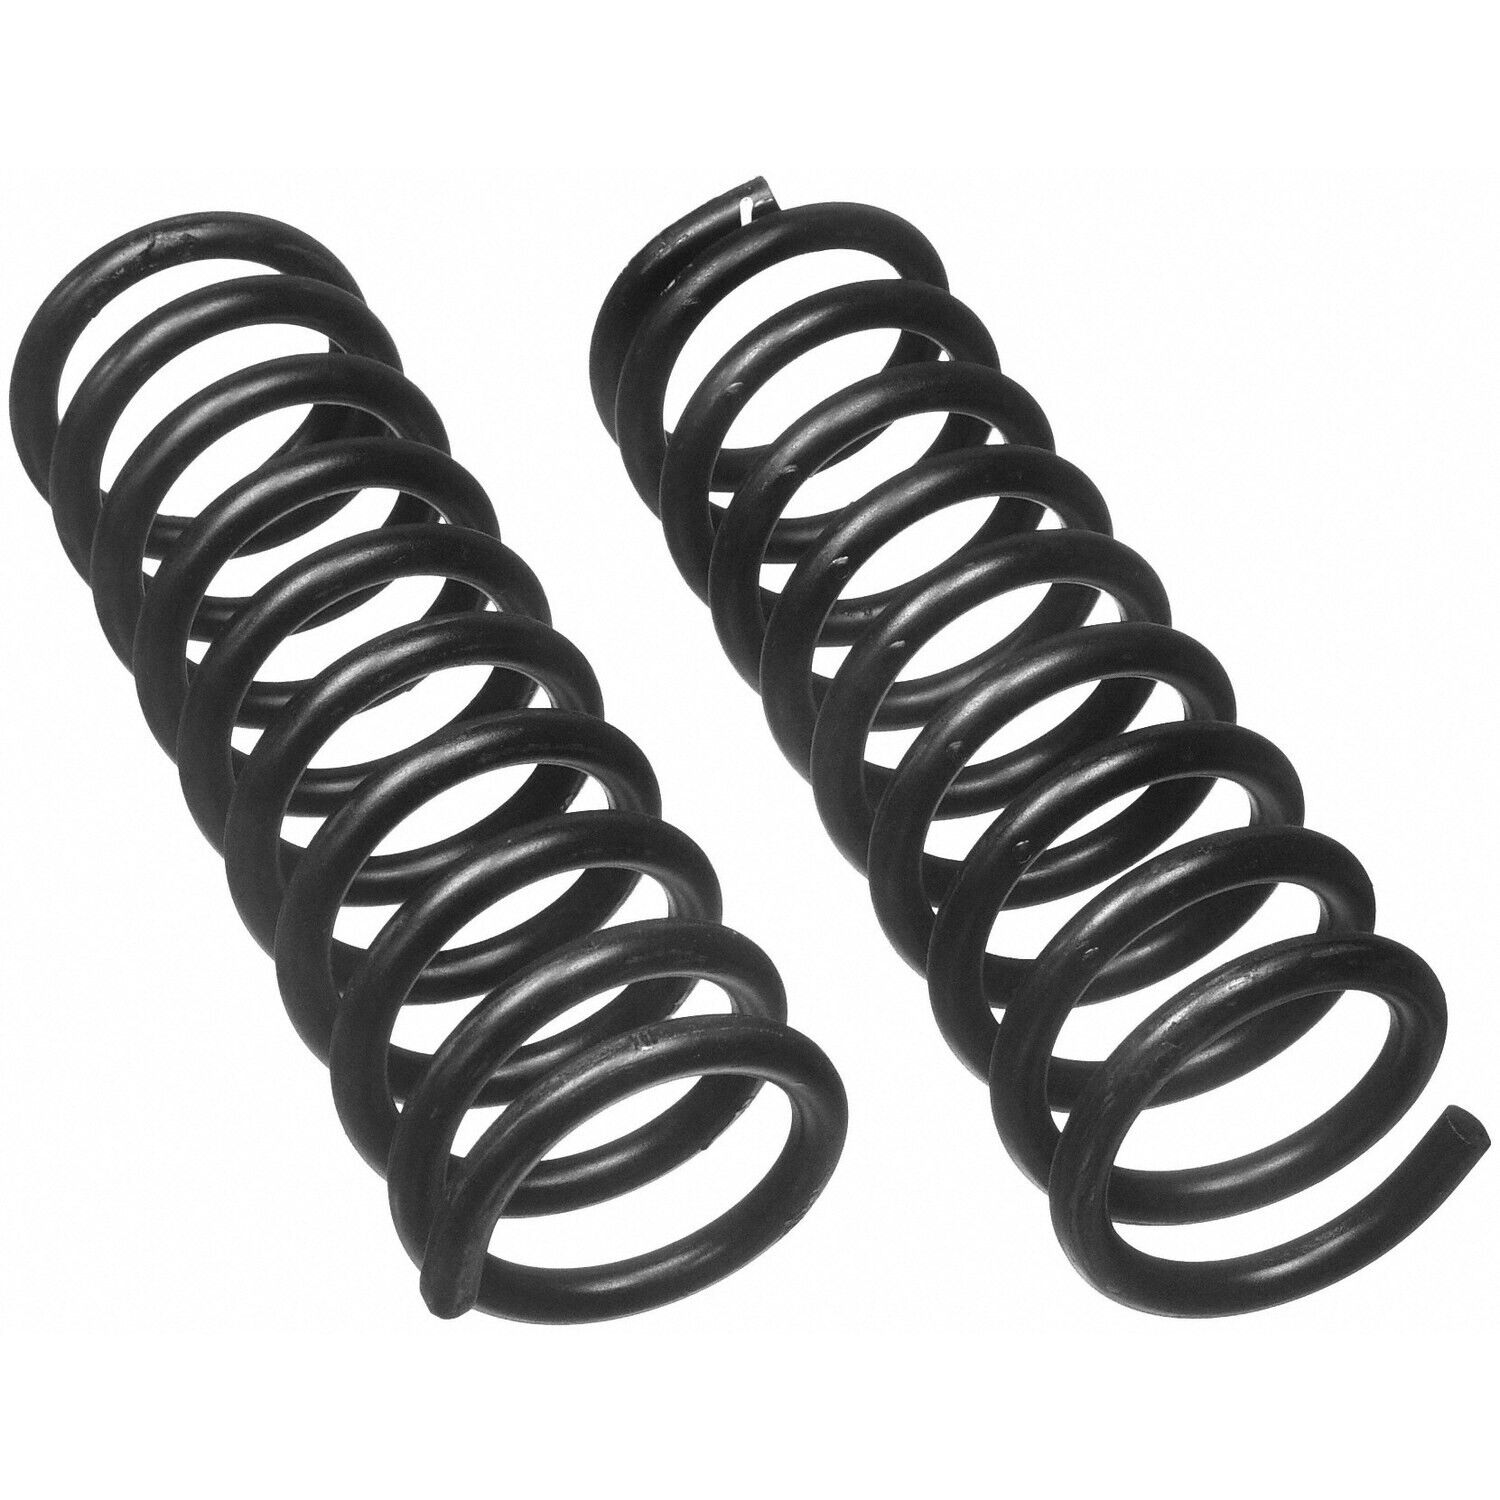 For Buick GS Chevy Chevelle Oldsmobile 442 Front Constant Rate Coil Spring Set